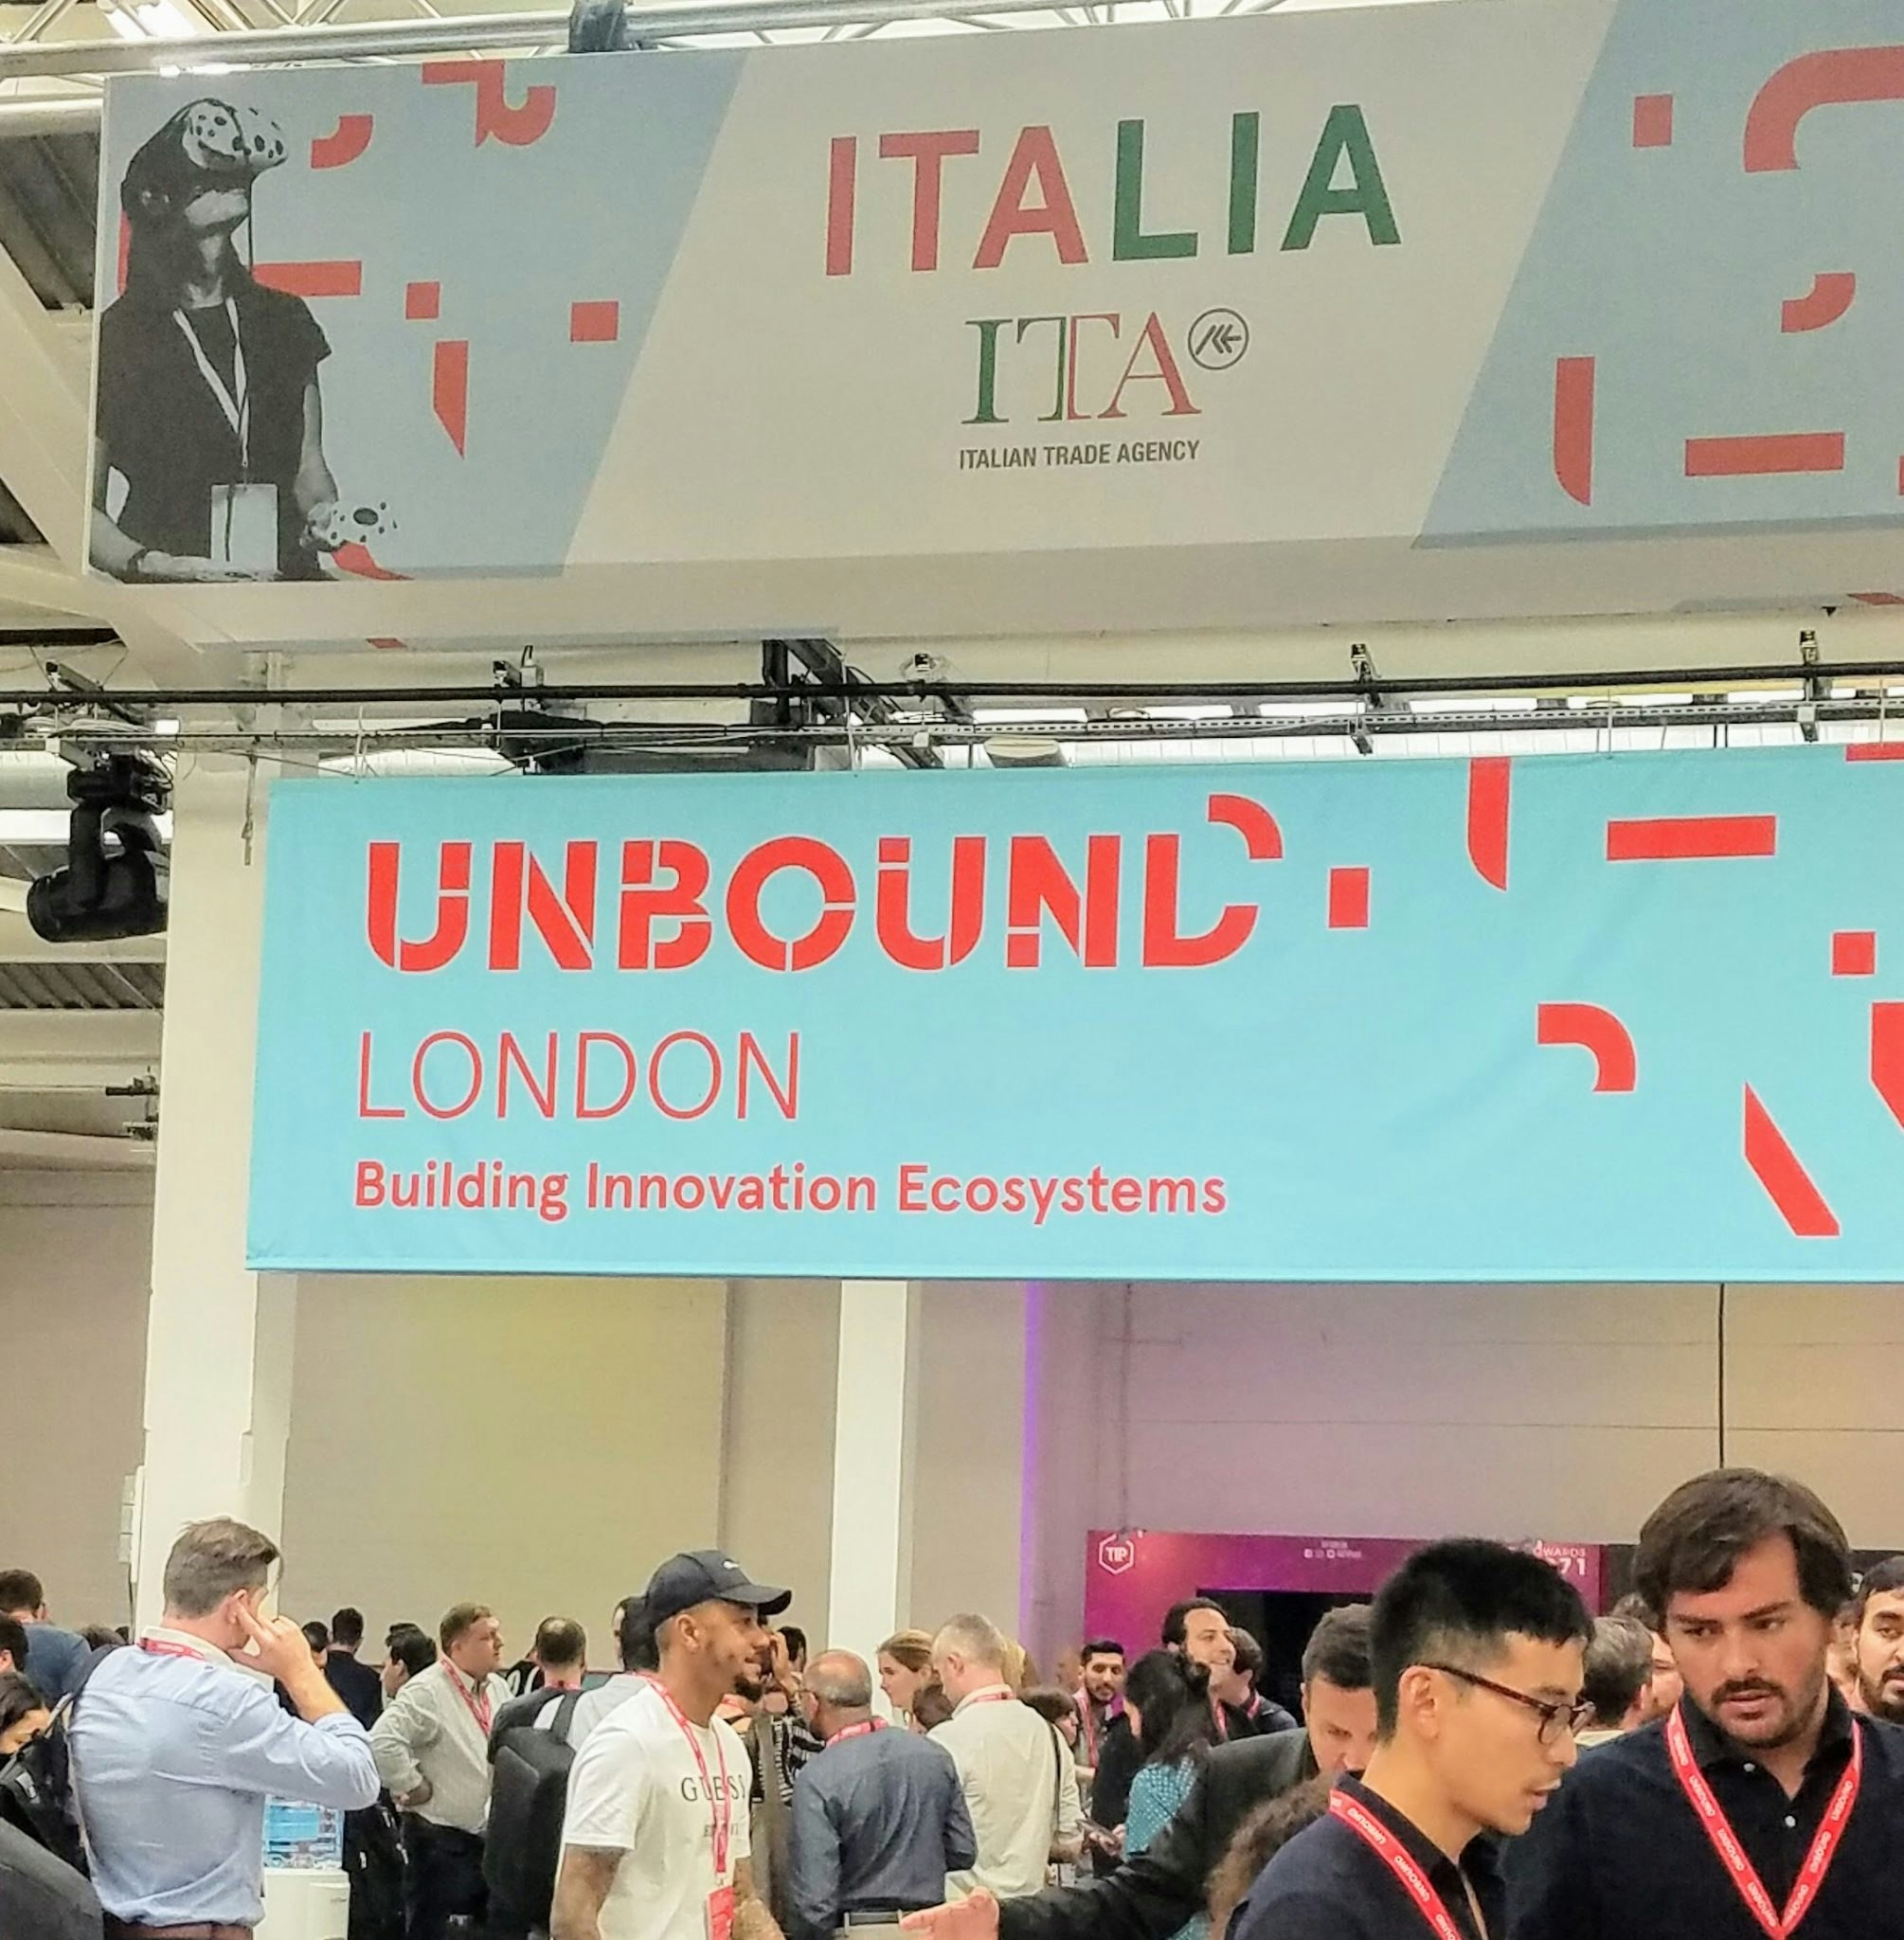 Italian Trade Agency at Unbound London